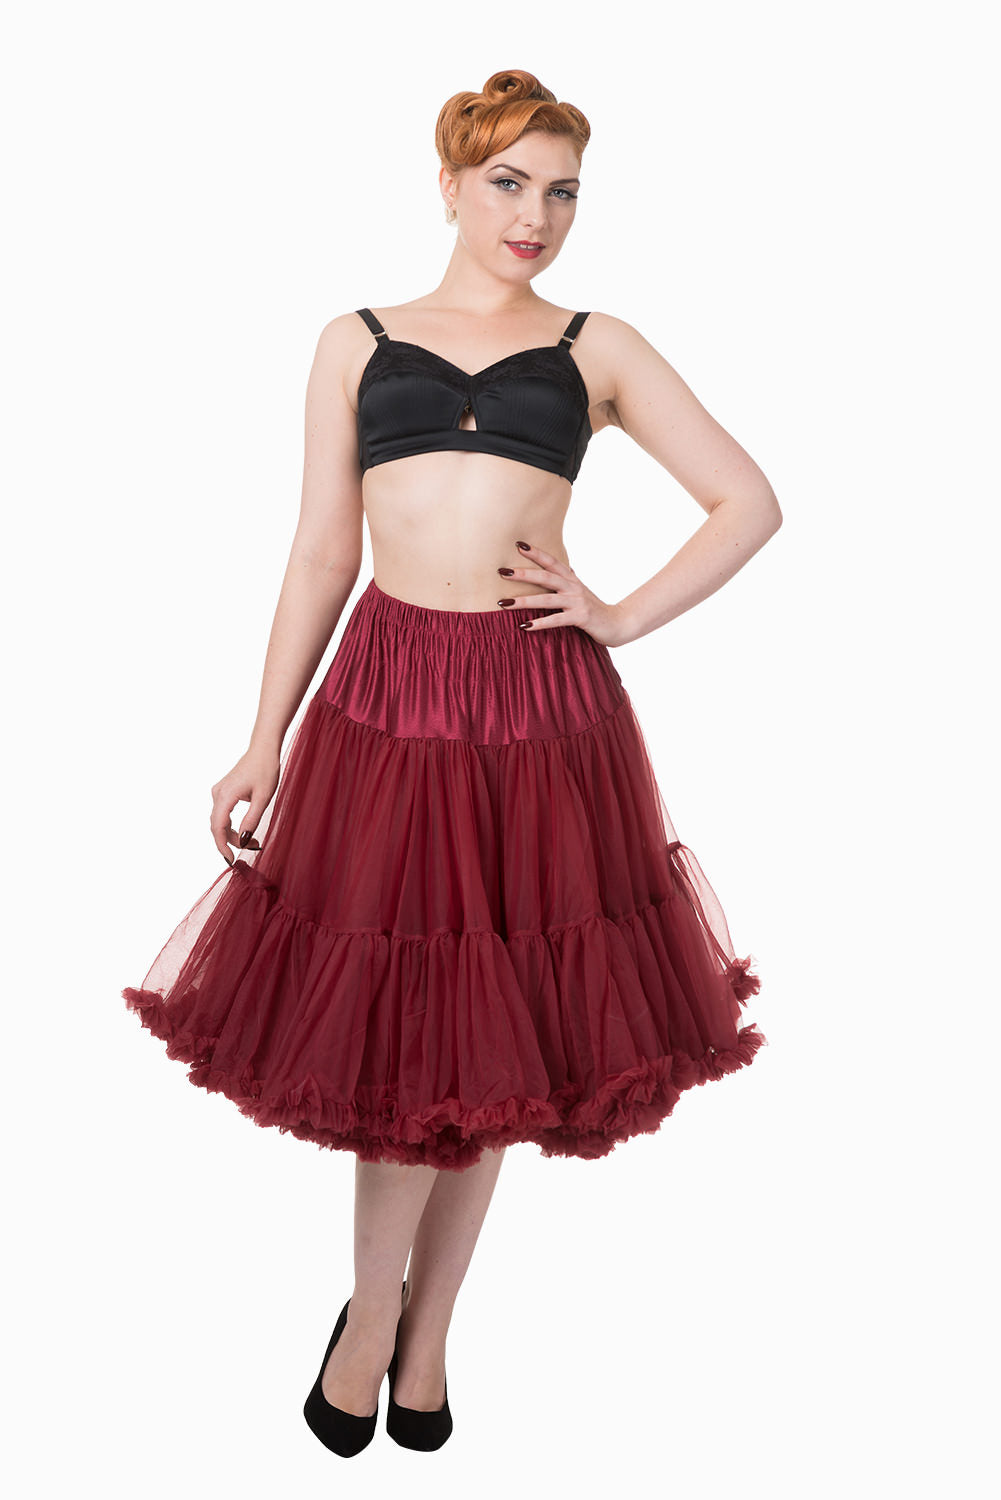 Dancing Days Lifeforms 50s Style 25"-27" Long Petticoat In Burgundy Red; Dancing Days; Lifeforms Petticoat; 50s Style; 25"-27" Long Petticoat; Burgundy Red